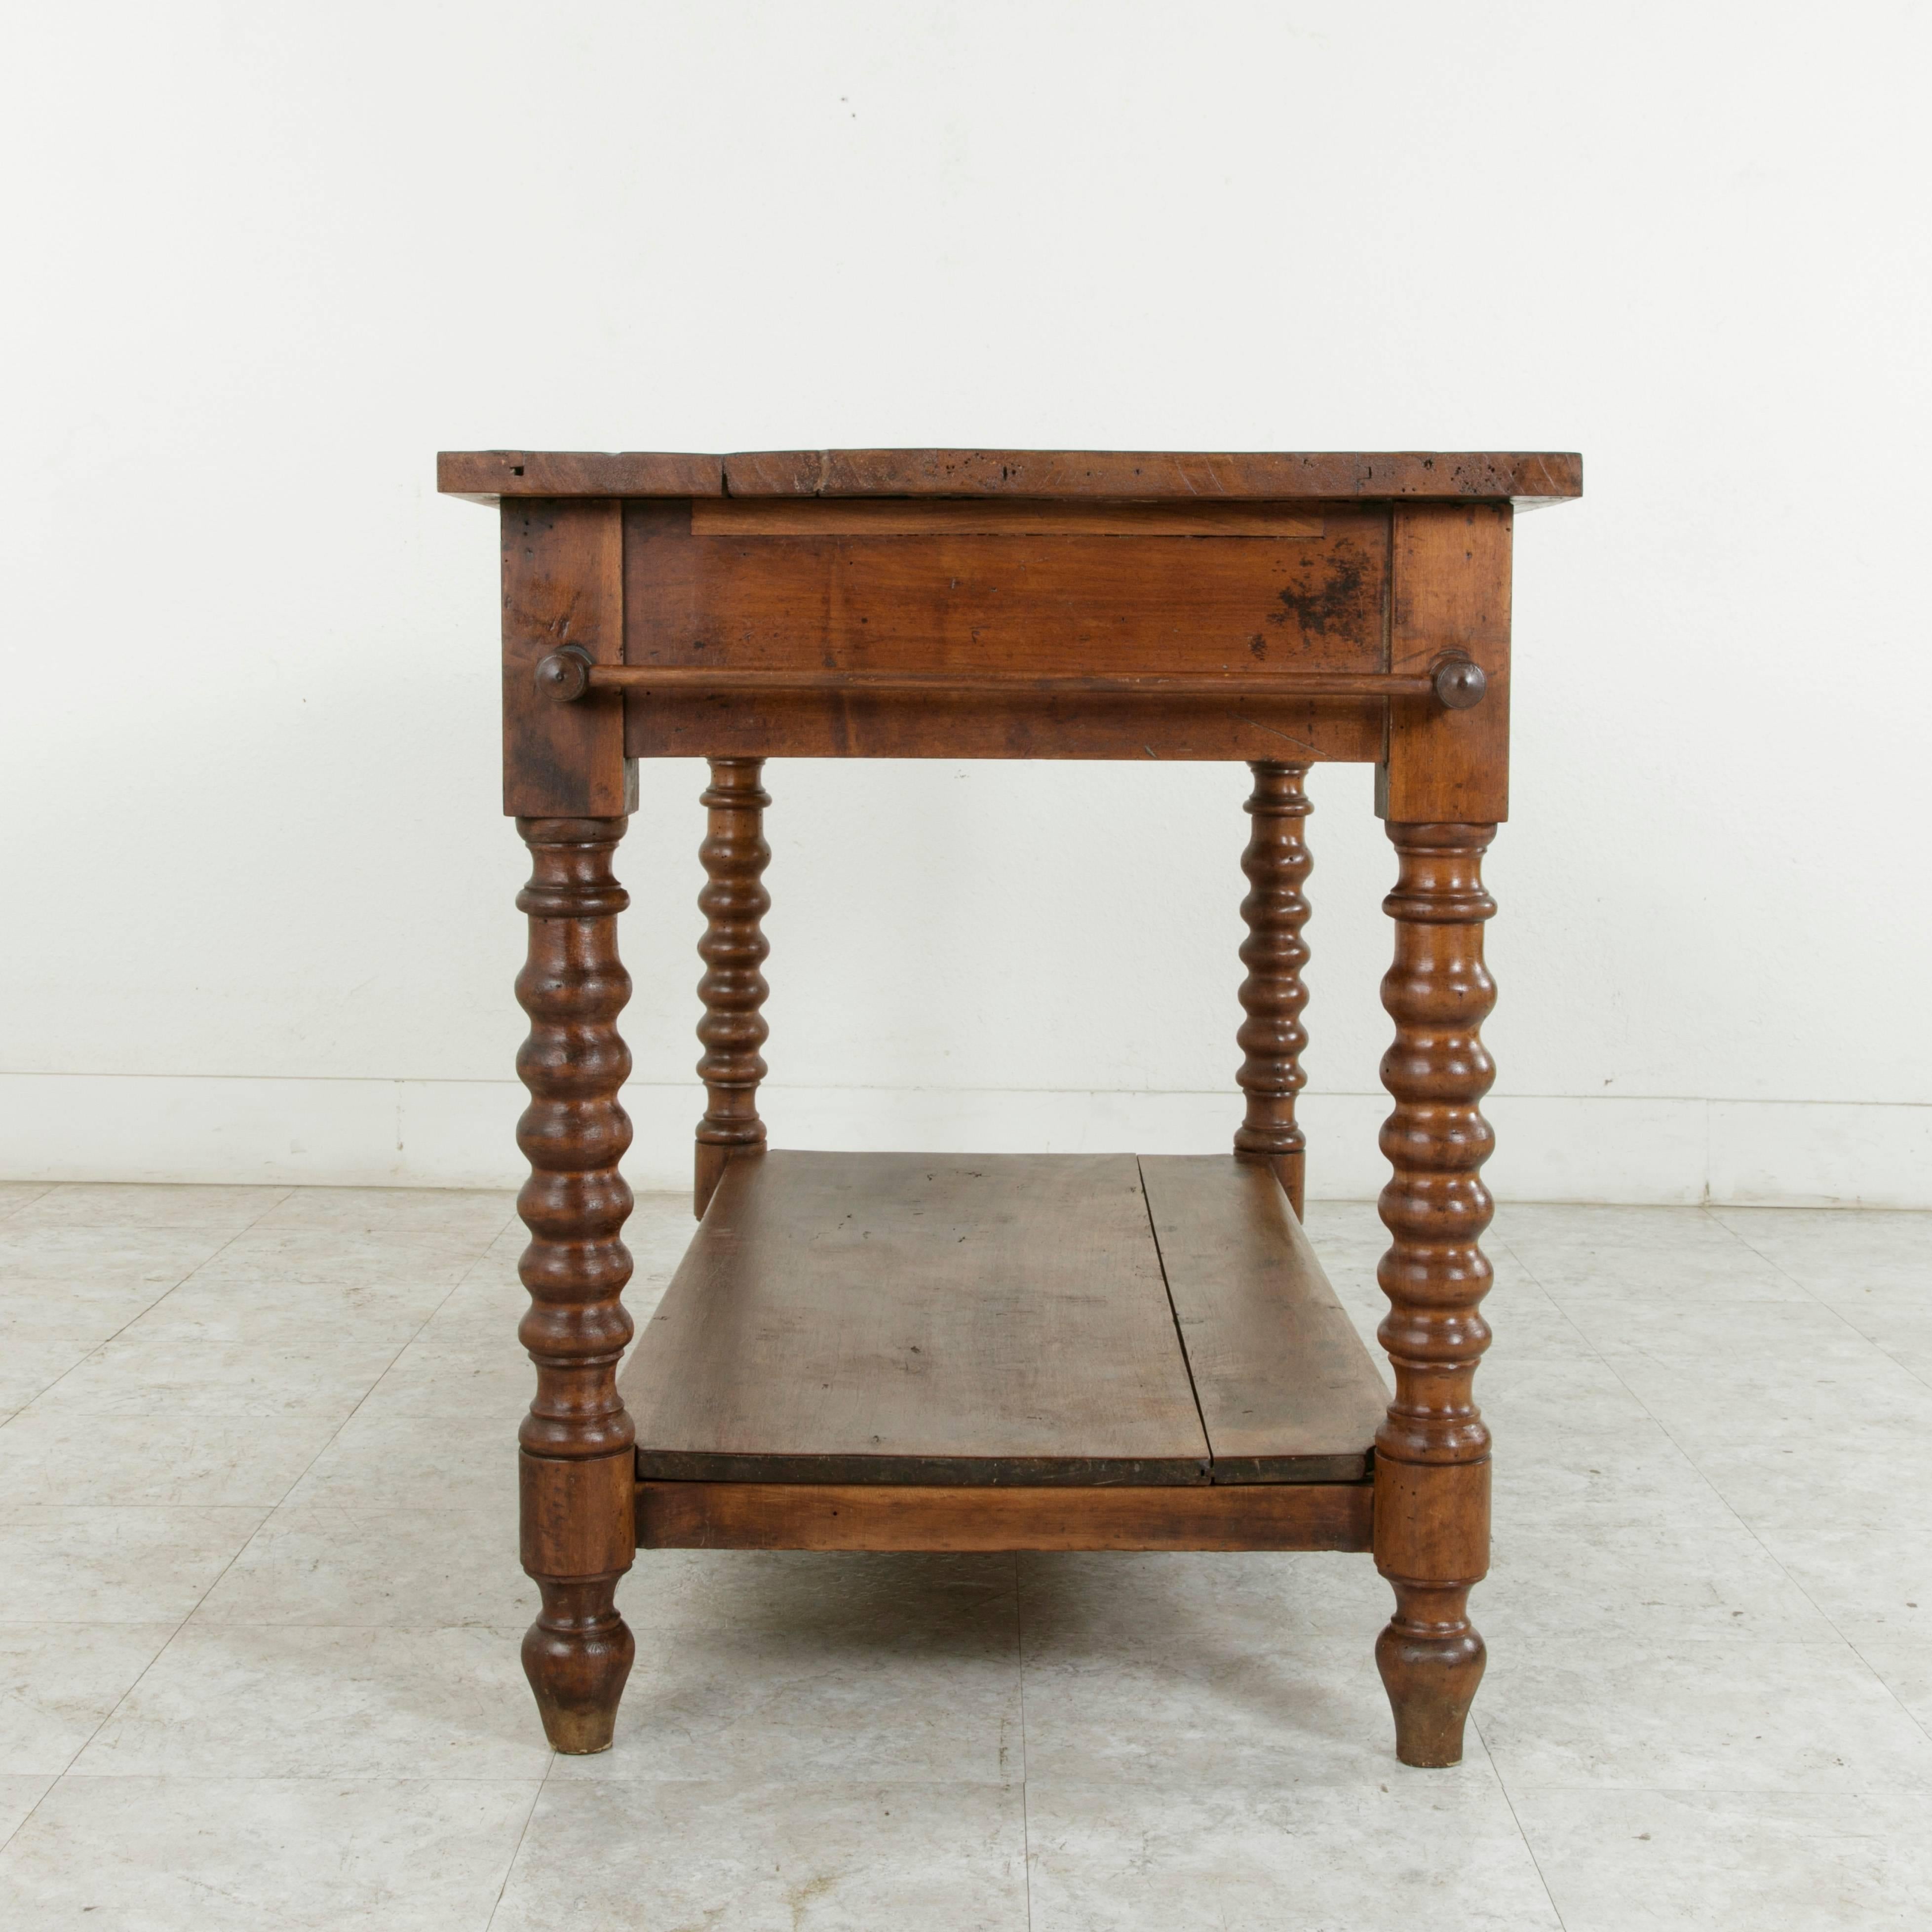 19th Century French Walnut Draper's Table or Kitchen Island with Drawer 3